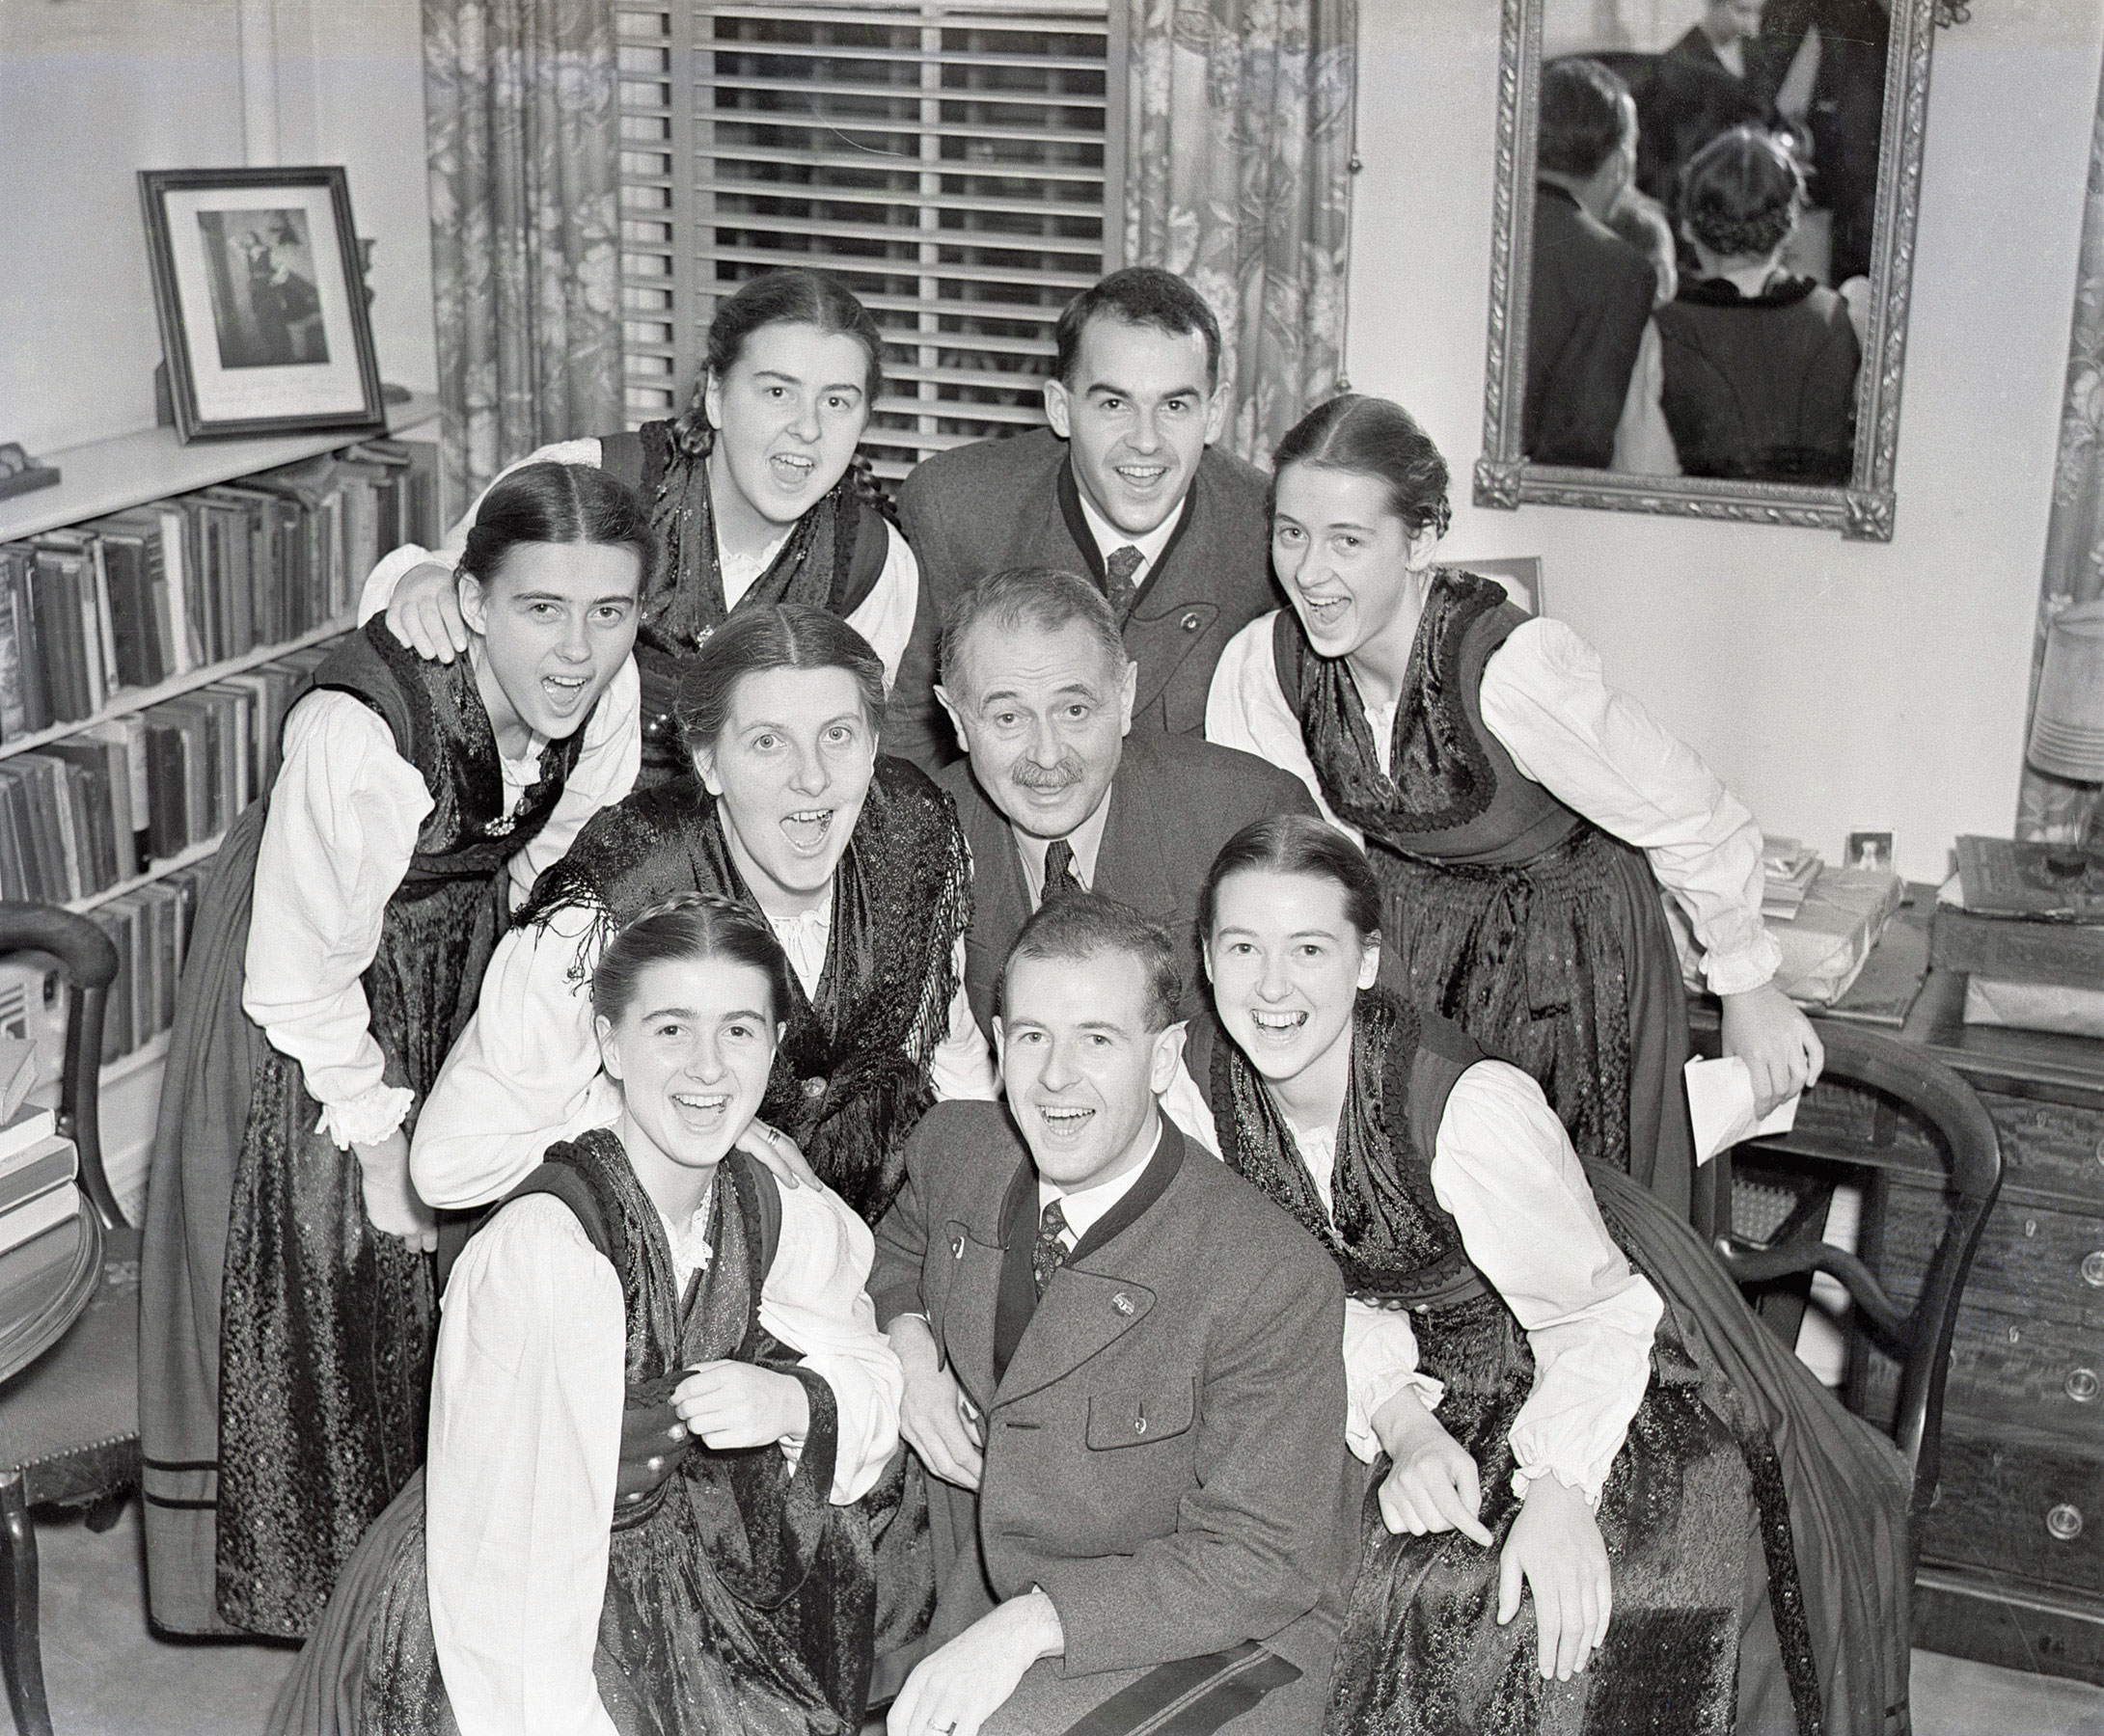 The Von Trapp Family singers warm up before a performance in New York's Town Hall. The musical "The Sound of Music" was based on their life in Austria. December 5, 1938.